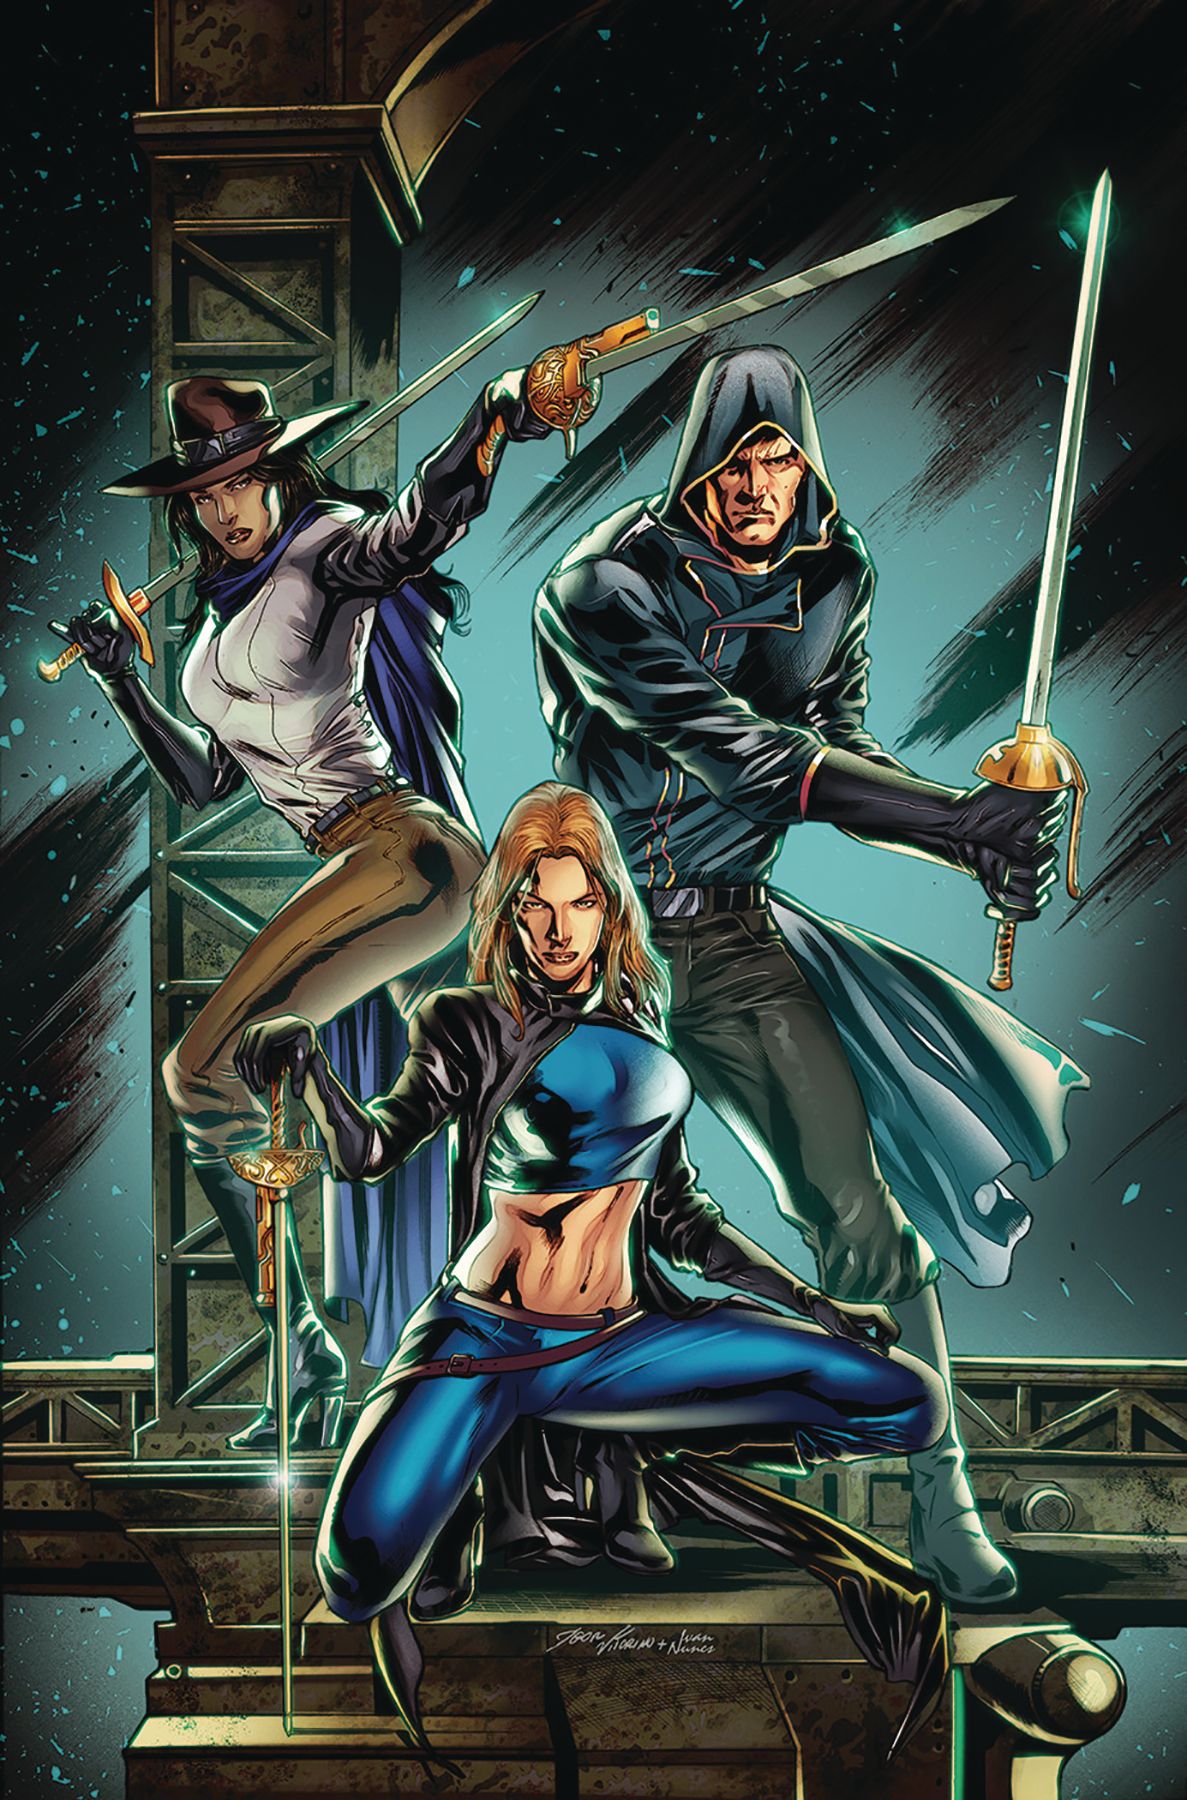 The Musketeers #5 Comic